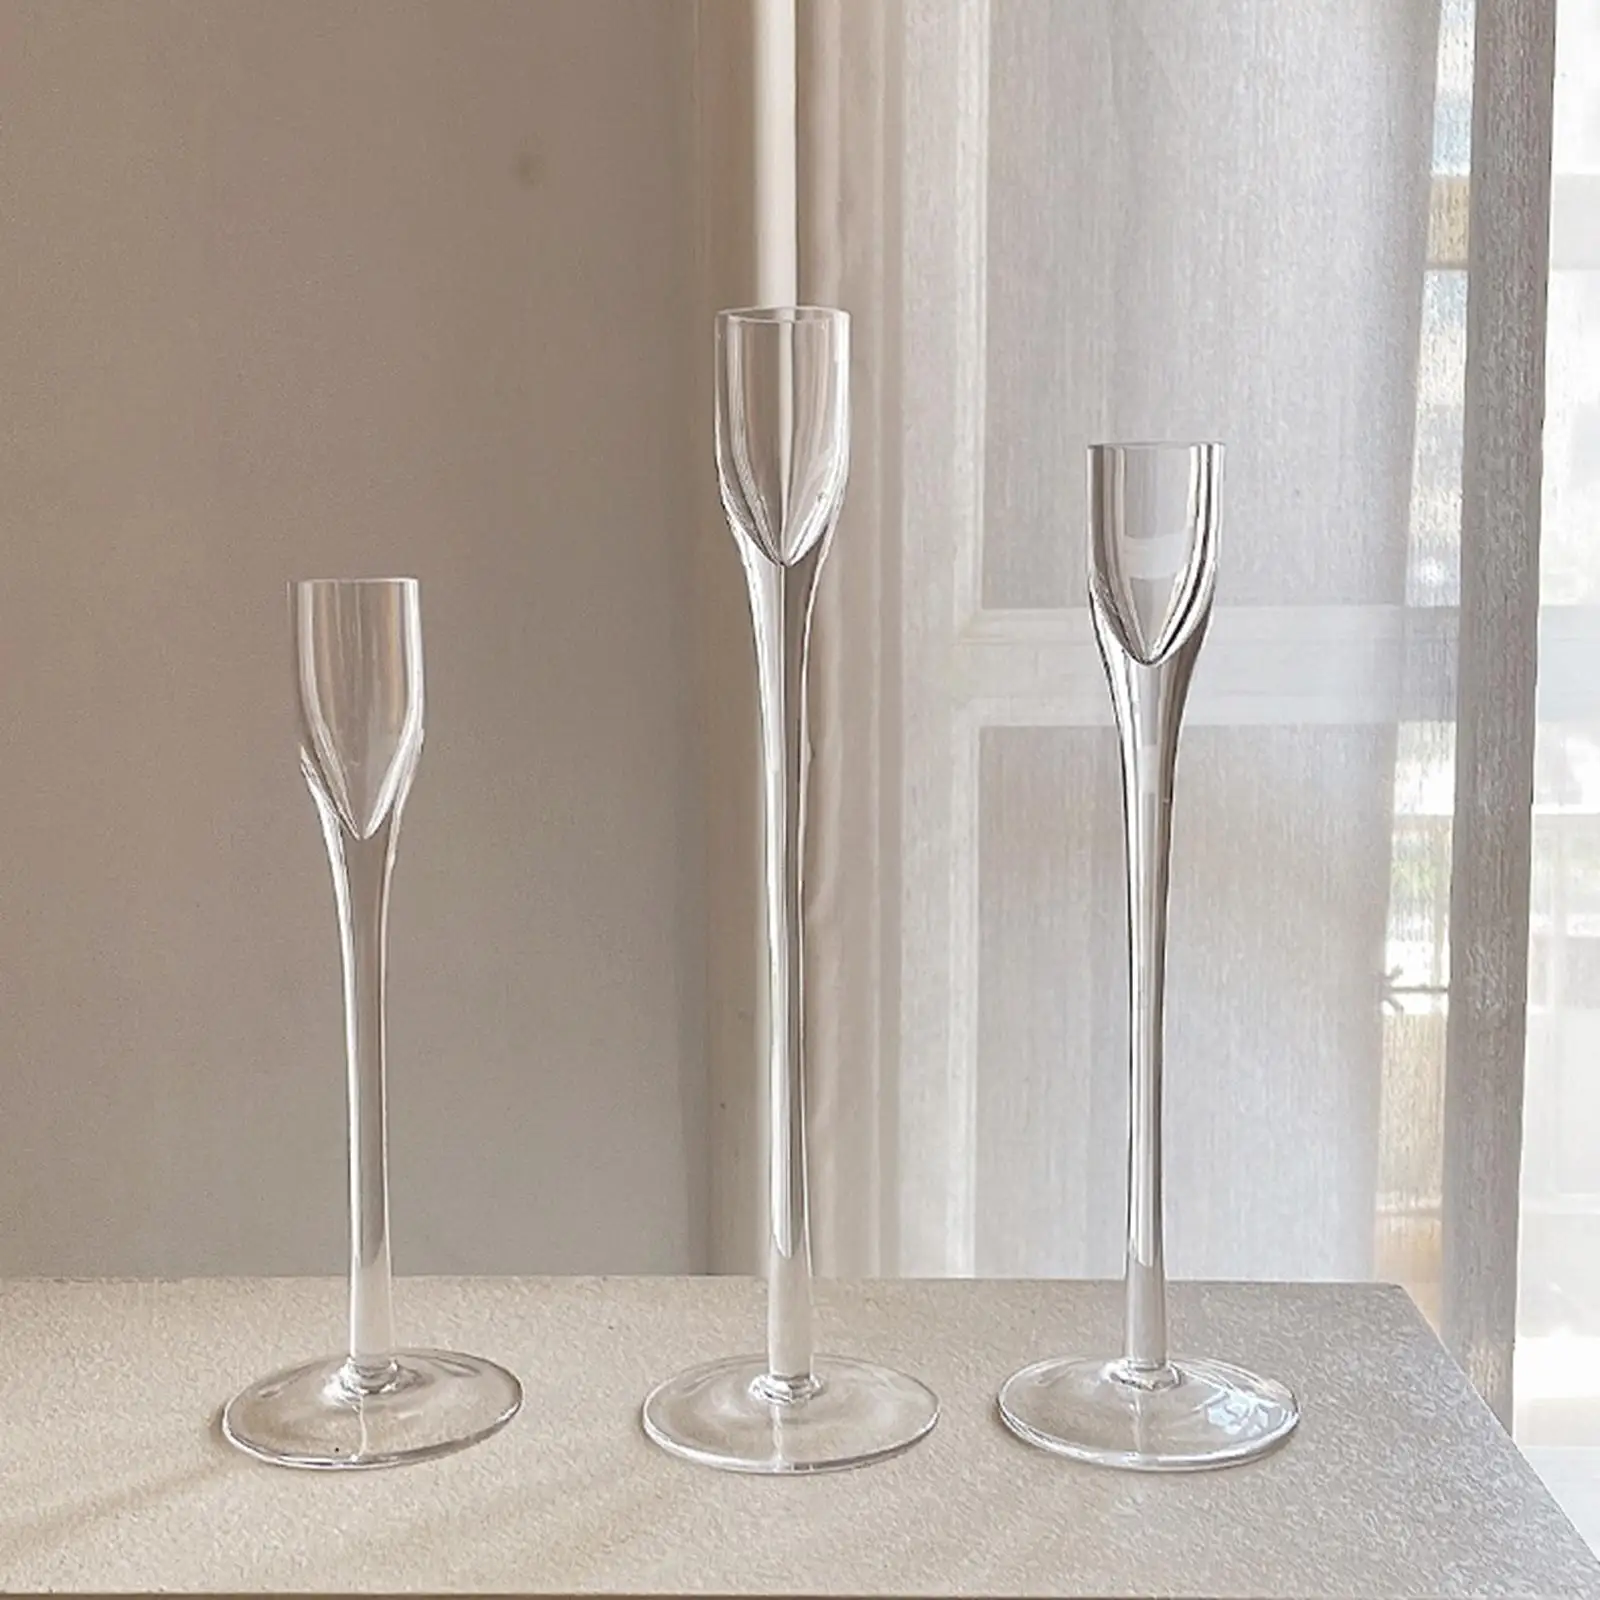 3x Glass Candlestick Home Decor Taper Candle Holders Candleholder for Spring Festival Hotel Fireplace Housewarming Party